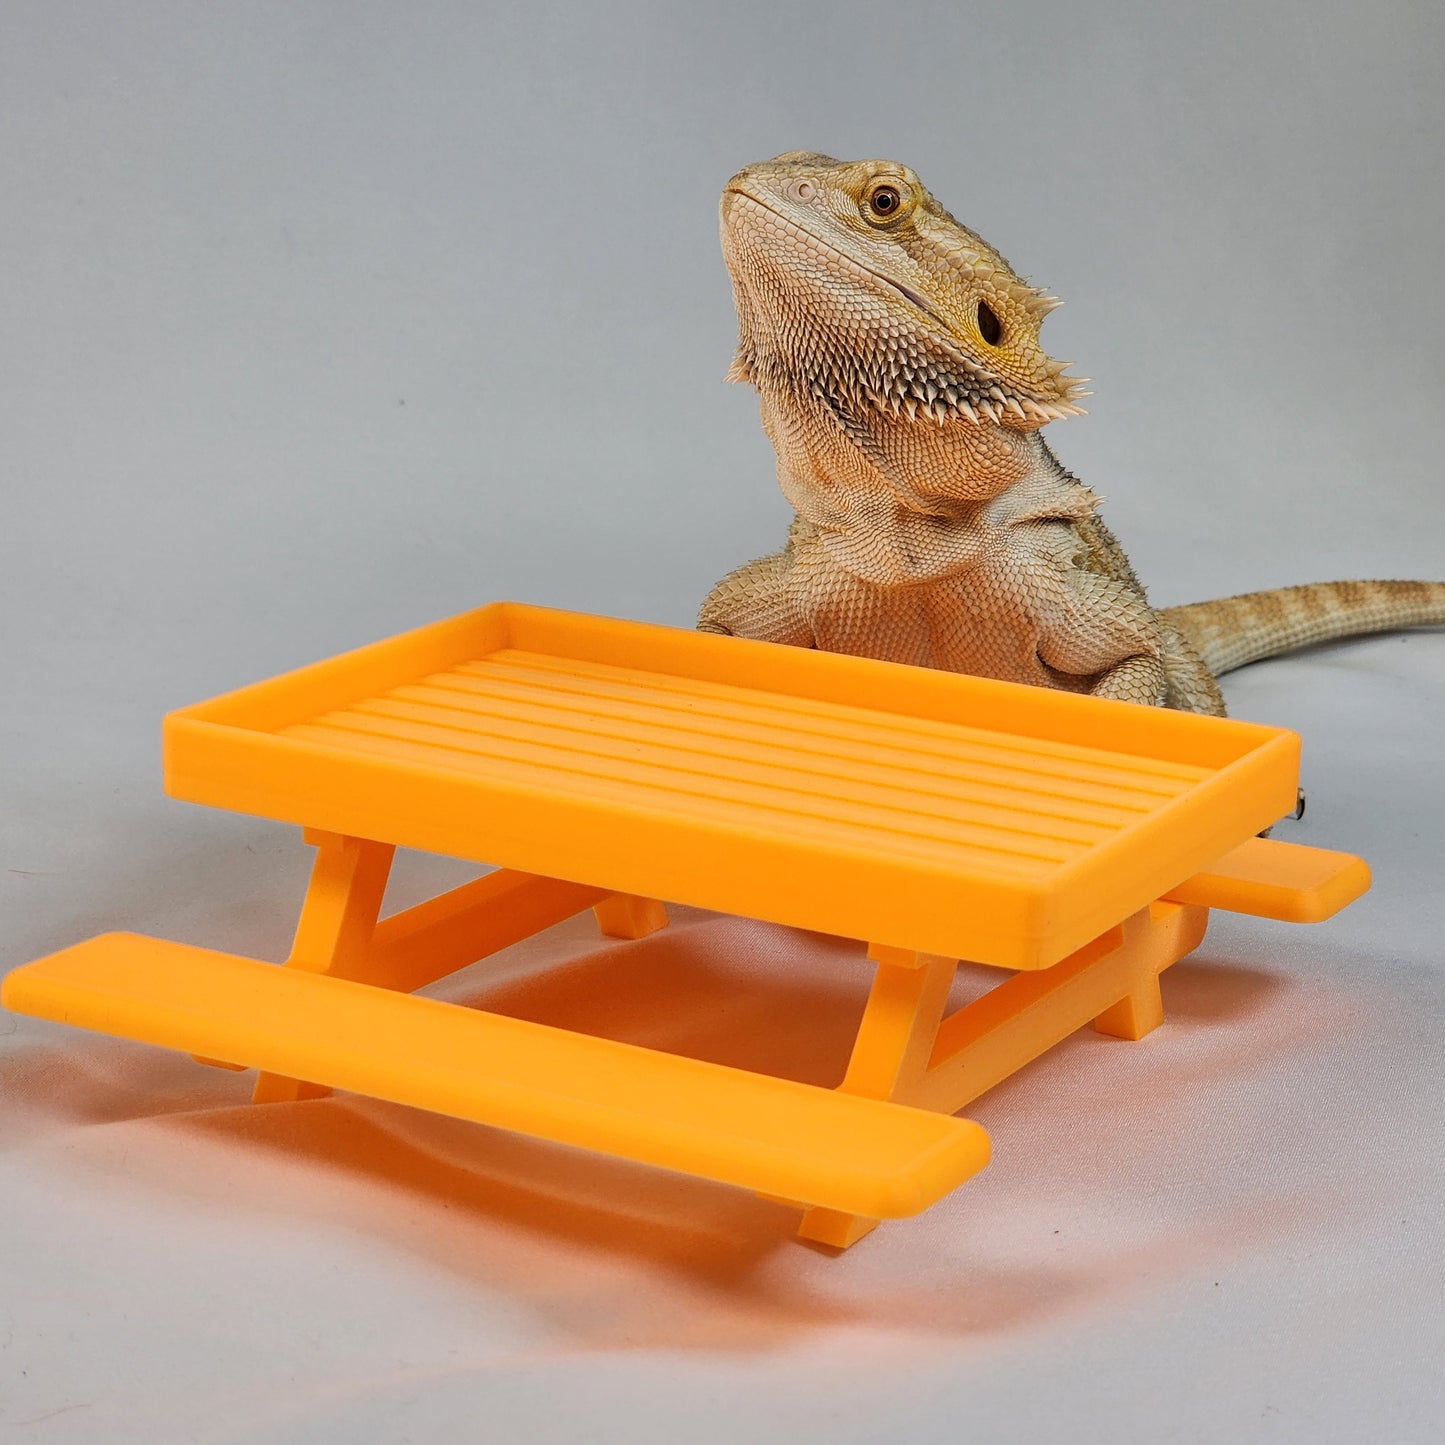 Reptile Picnic Table / Colored Large food dish for bearded dragon / miniature Picnic table  / Gecko and reptile decor|